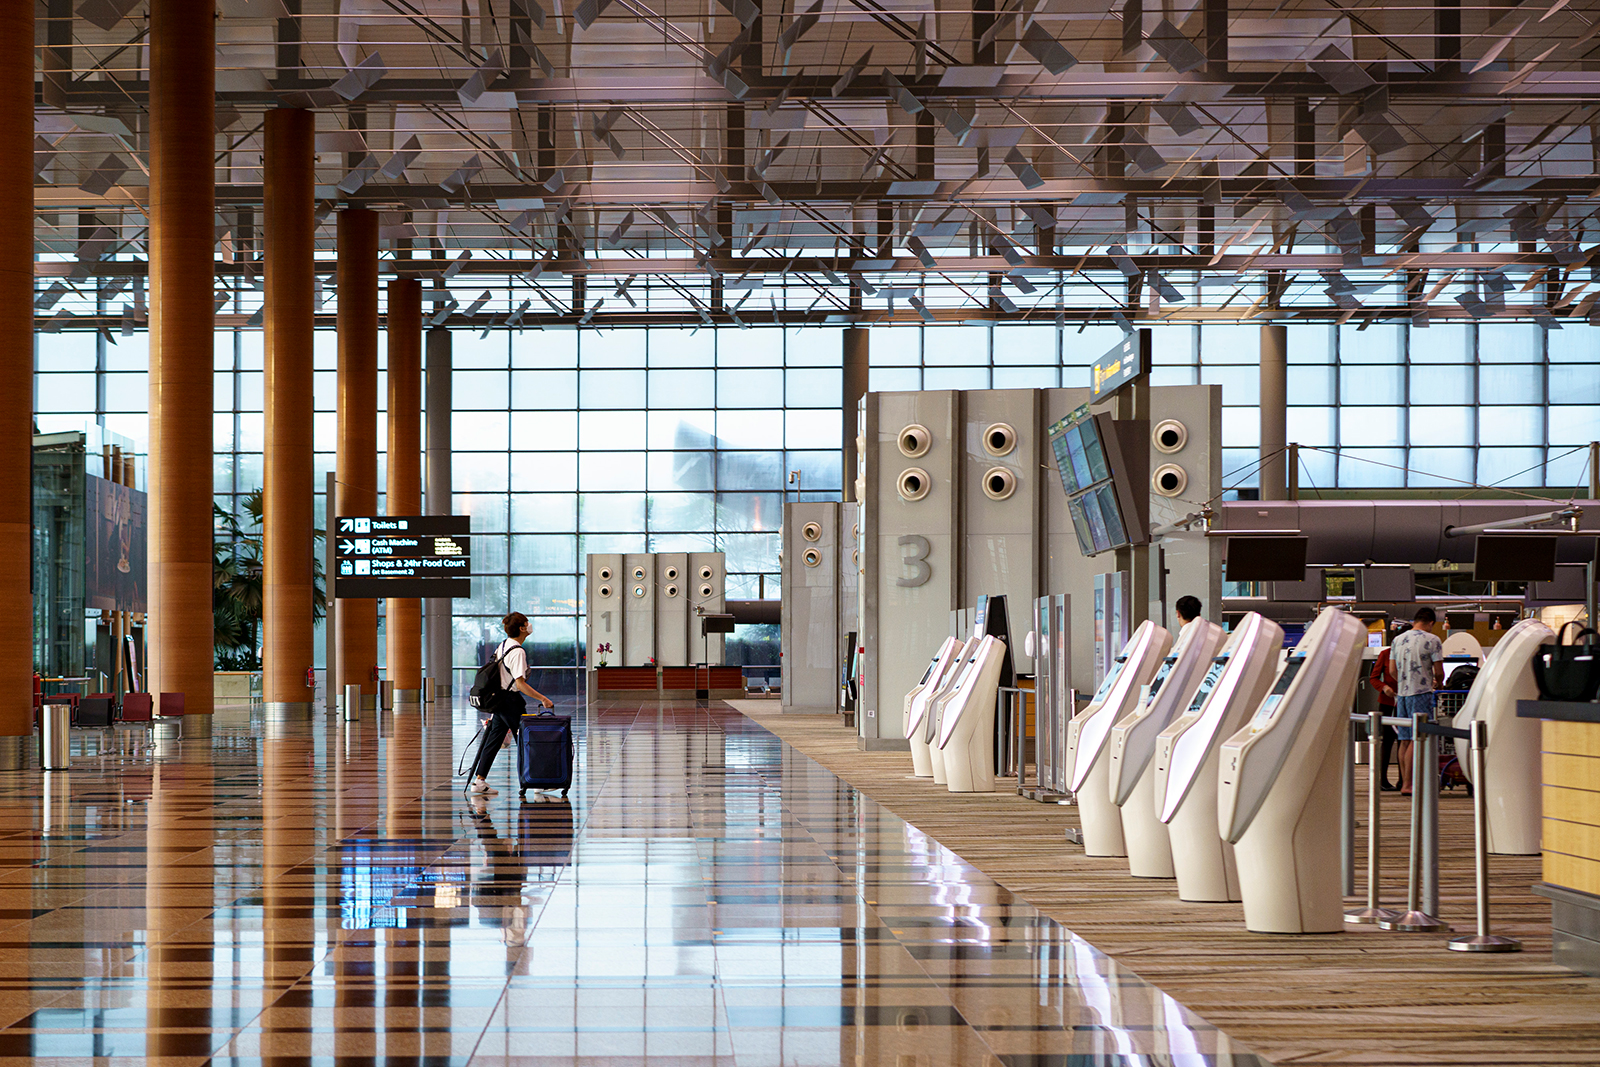 A traveler arrives at the departure hall of Changi Airport Terminal 3 in Singapore, on November 11.